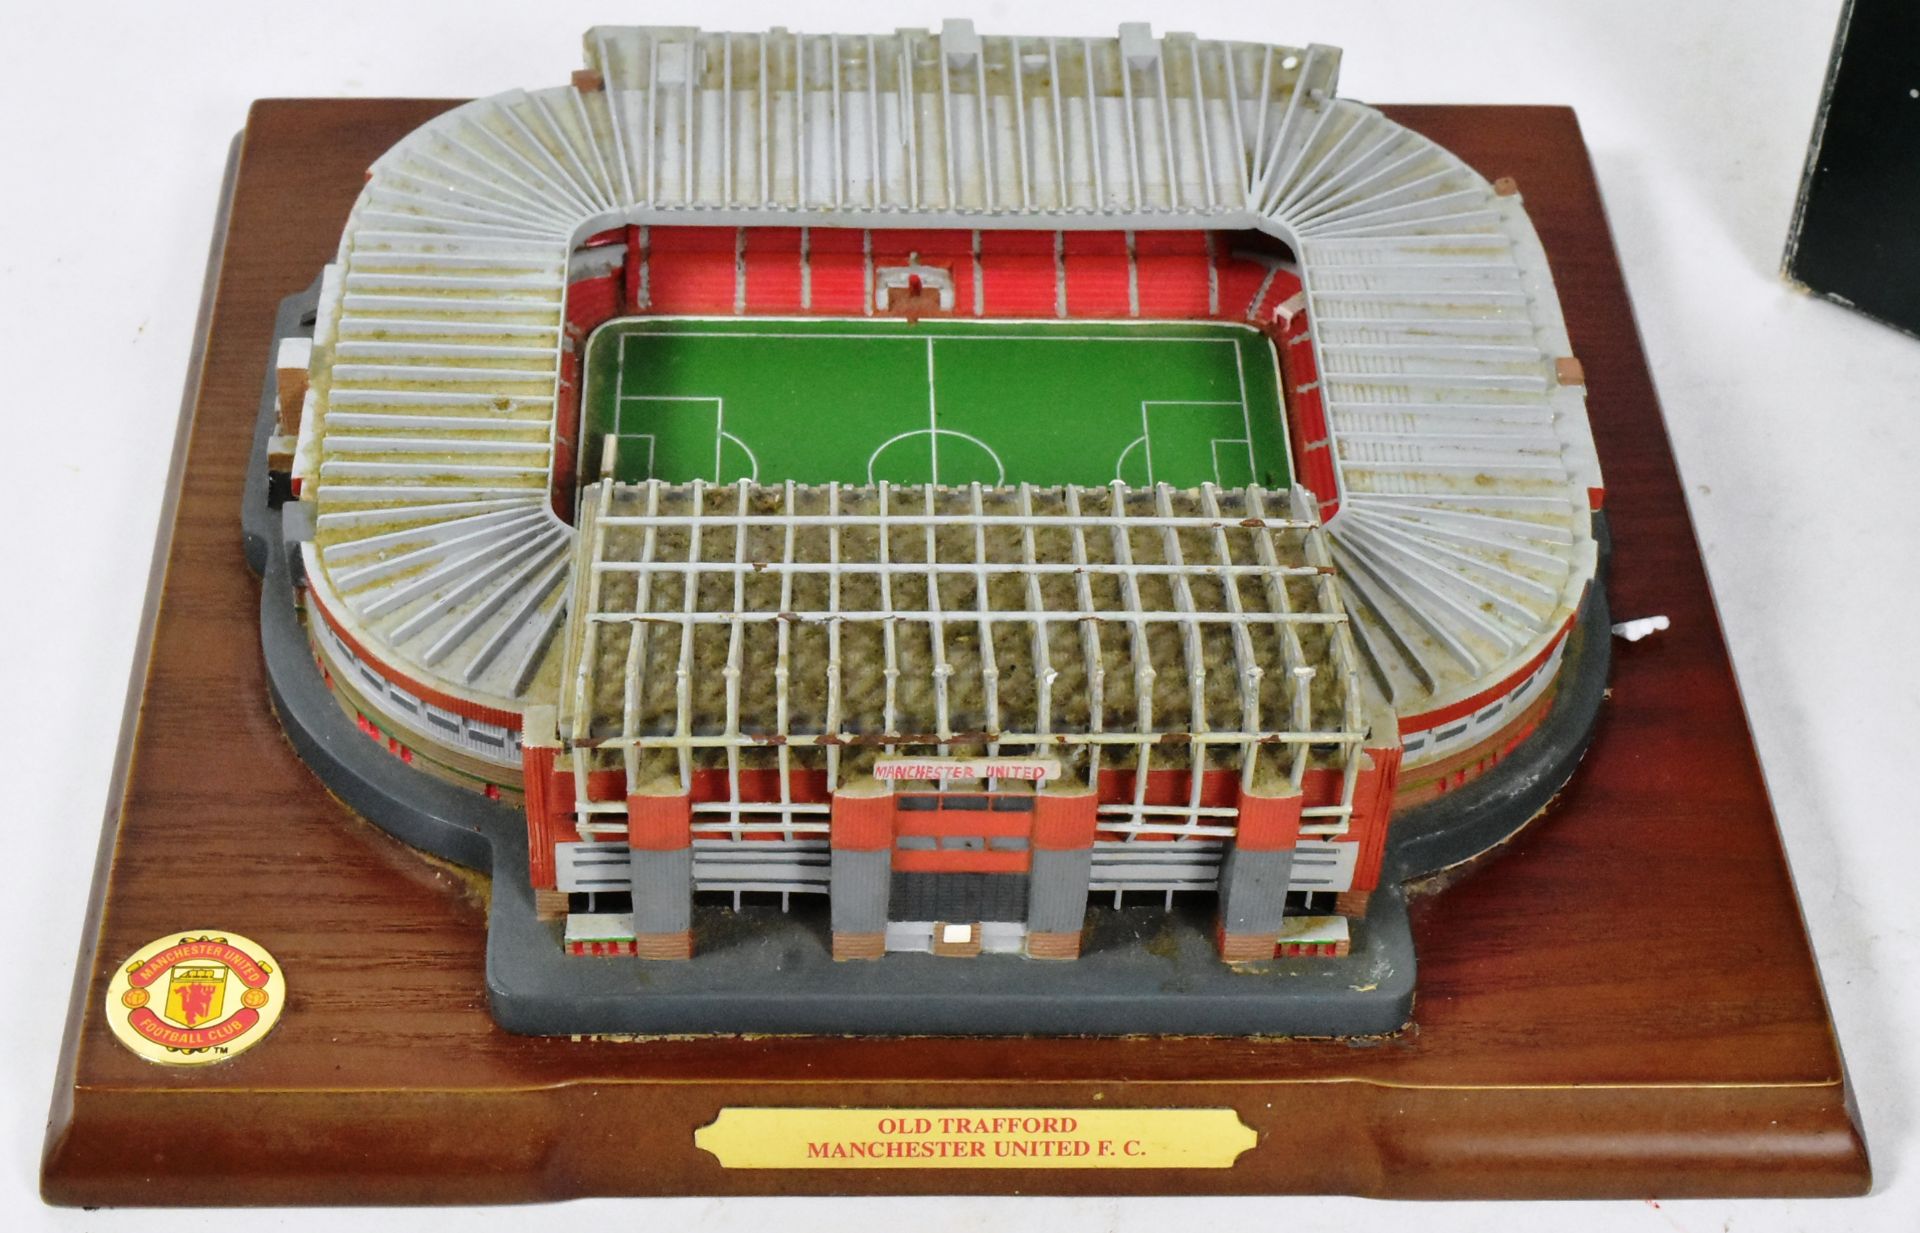 OFFICIAL MANCHESTER UNITED OLD TRAFFORD REPLICA STADIUM MODEL - Image 2 of 5